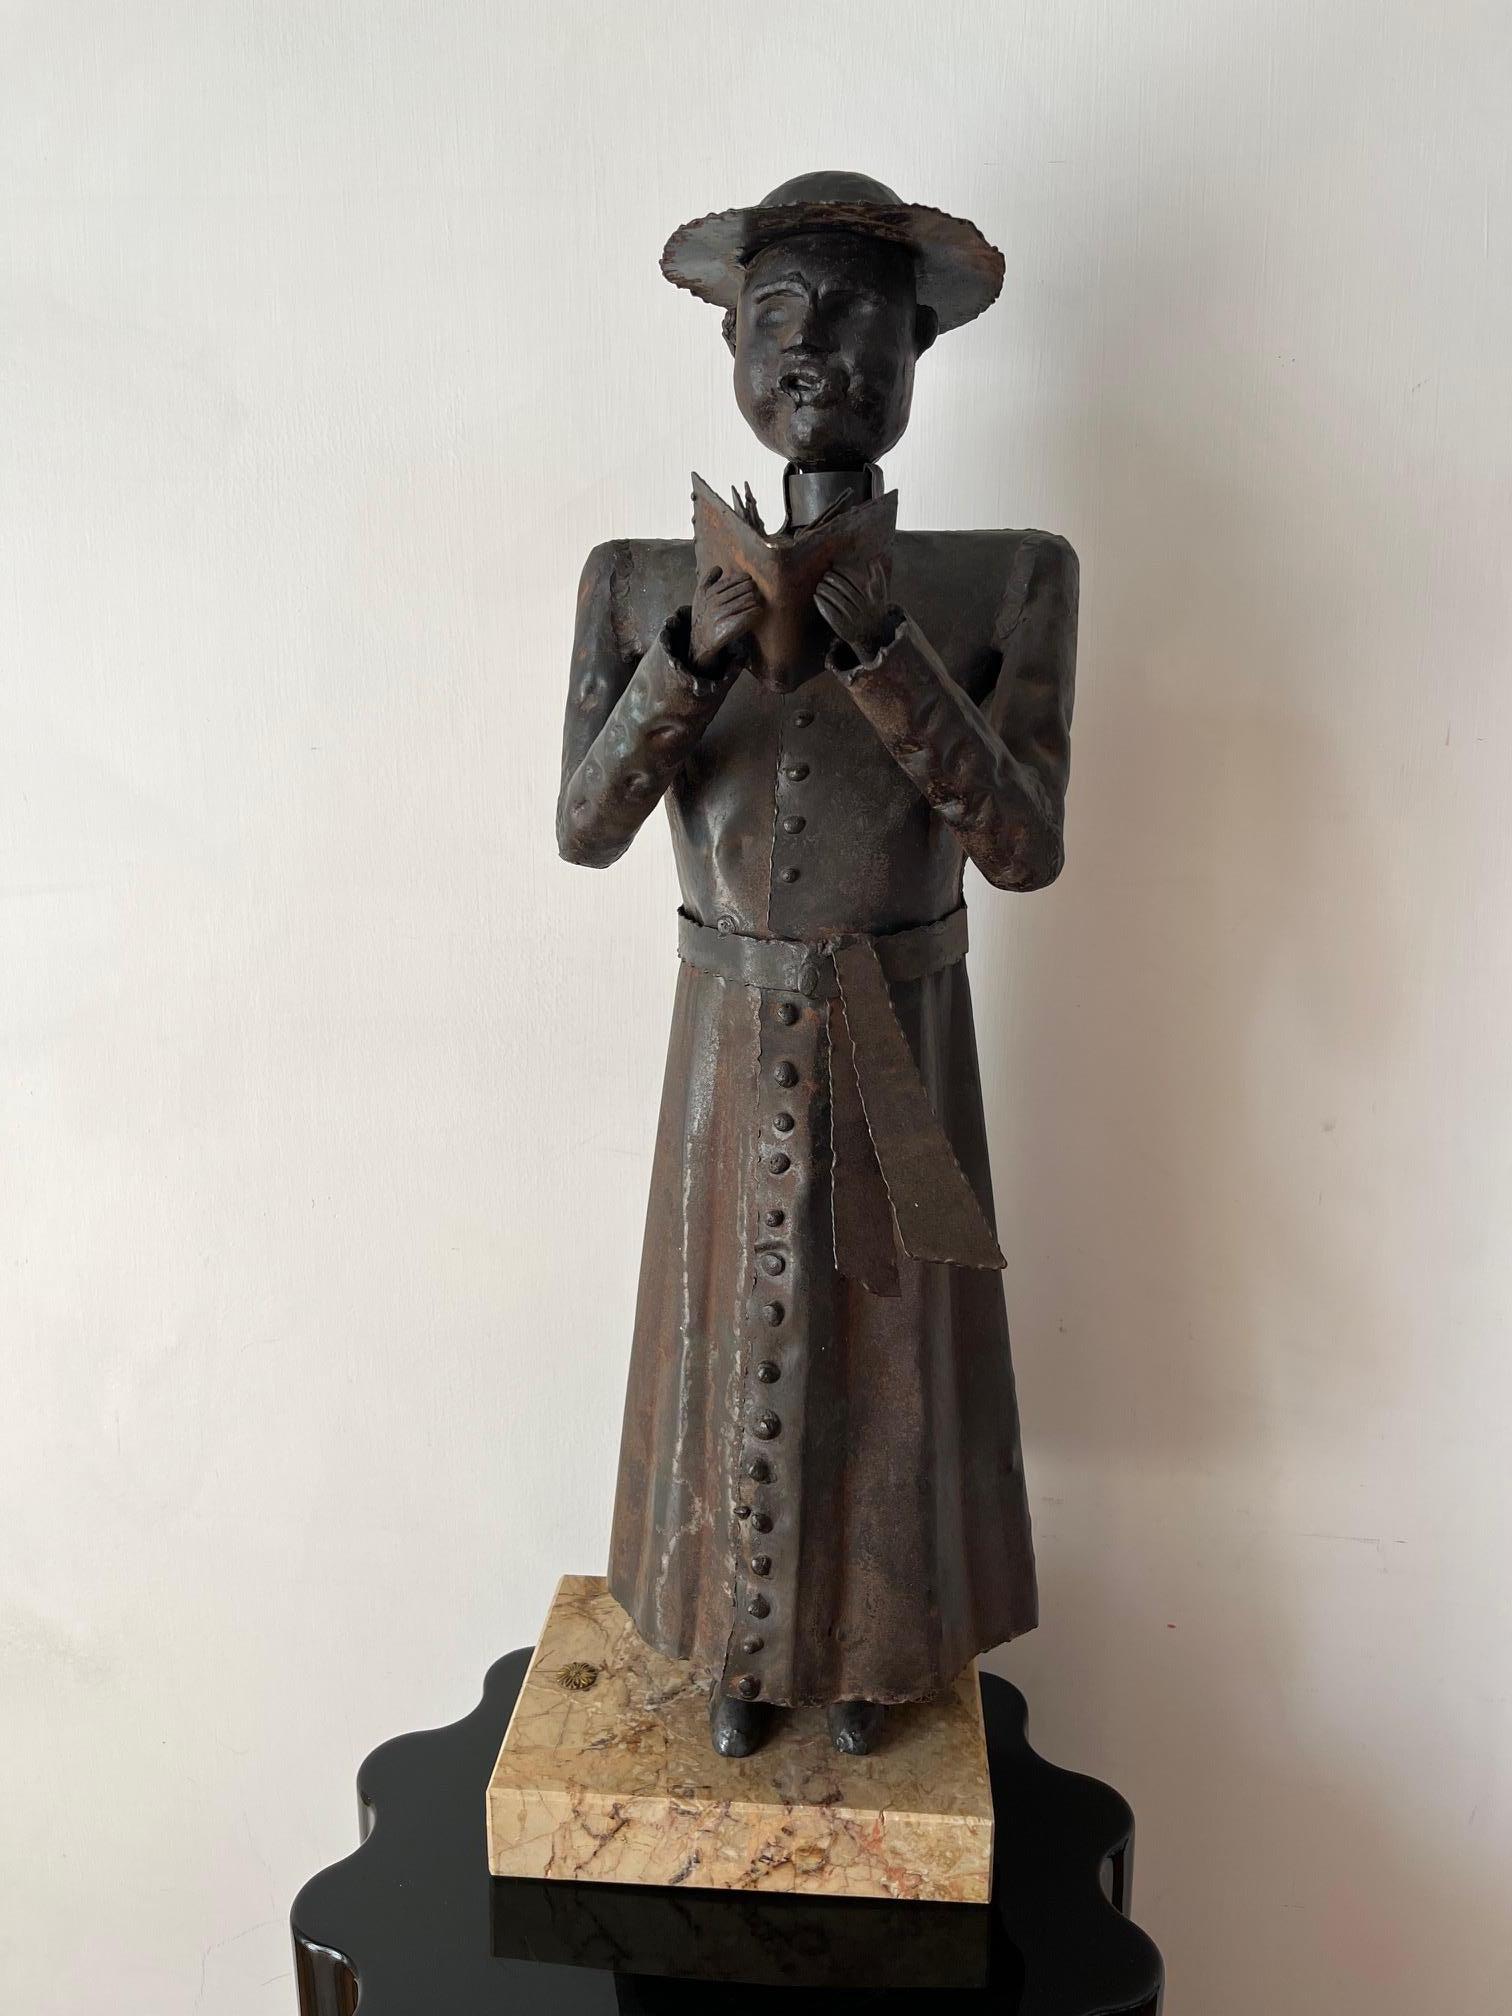 Grittani Bishop Sculpture Wrought Iron Work 1970 -Top Art- For Sale 7